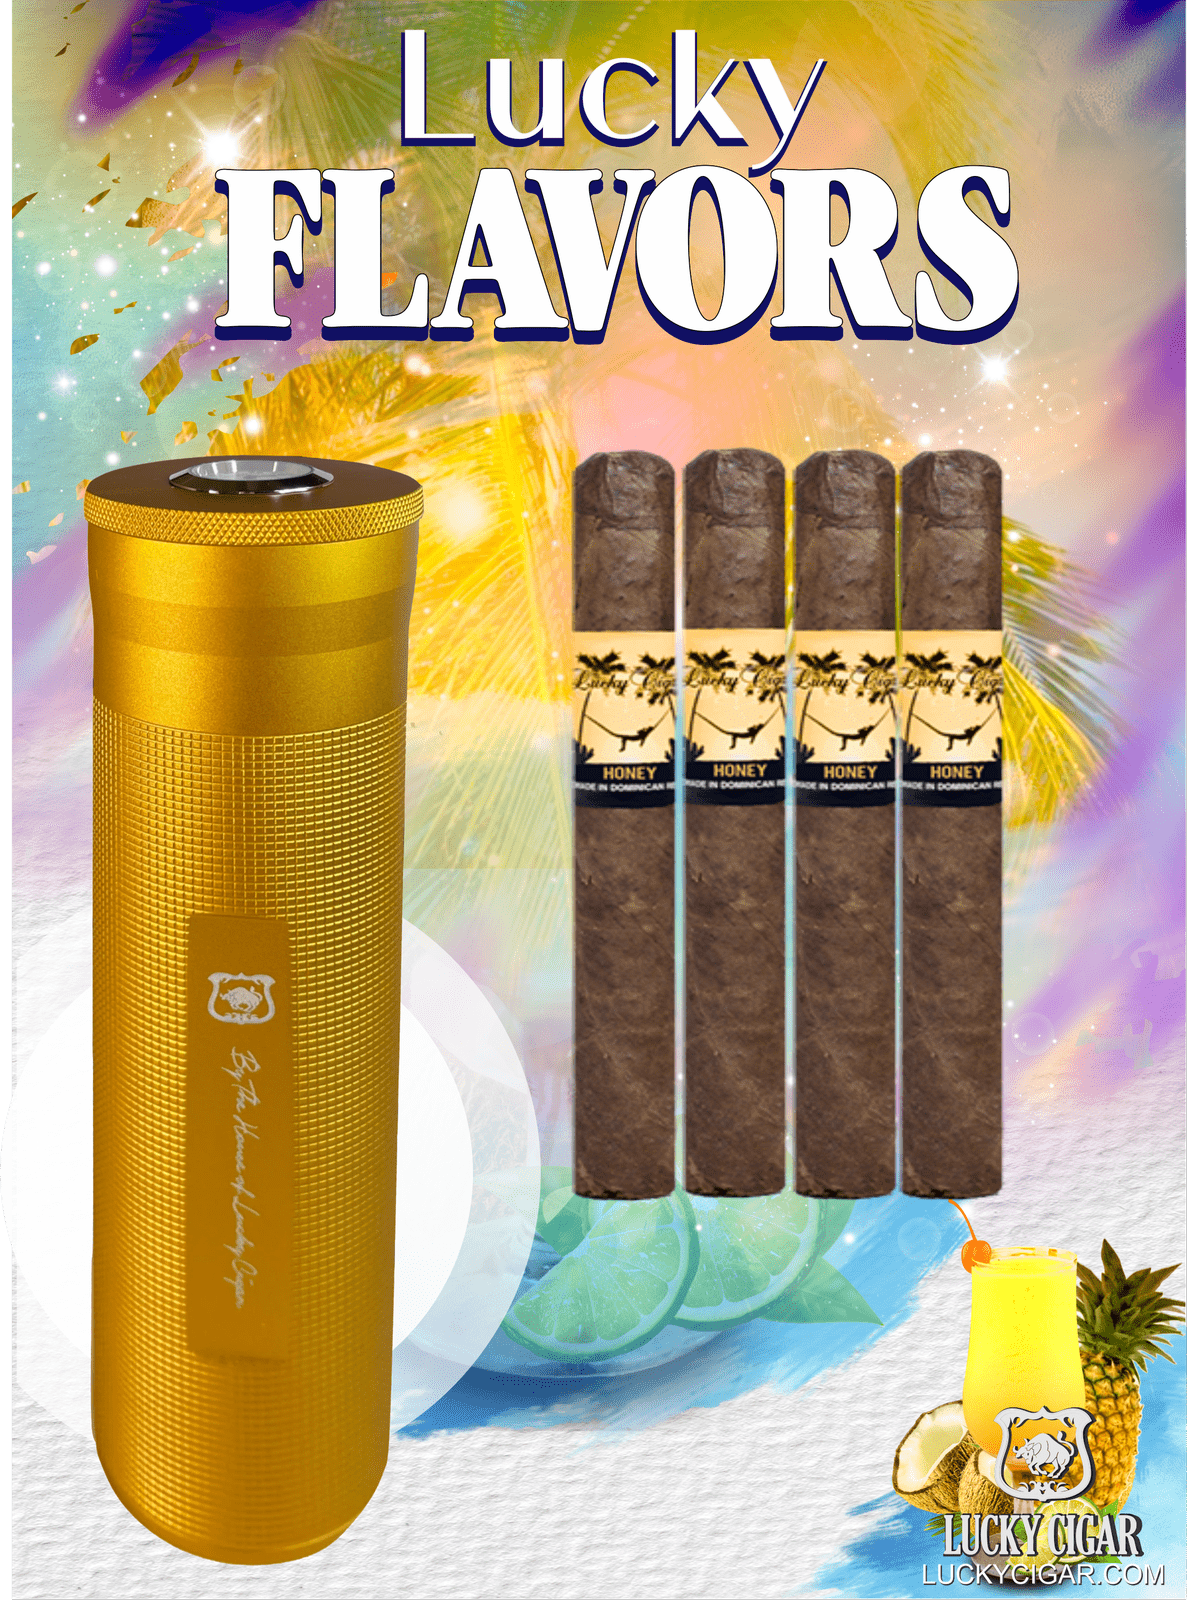 Flavored Cigars: Lucky Flavors 4 Honey Cigar Set with Travel Humidor